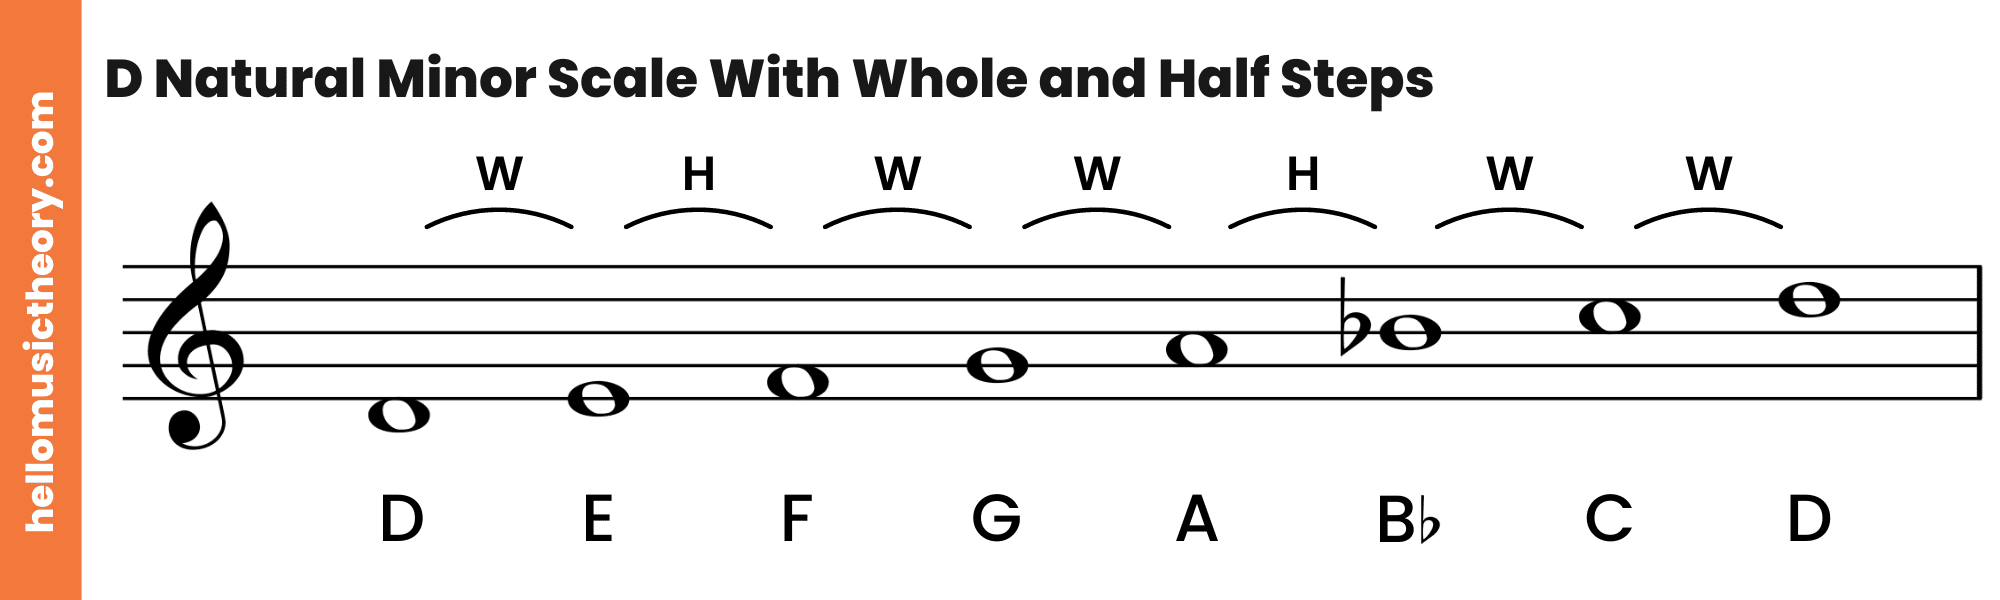 D Natural Minor Scale Treble Clef Ascending With Whole and Half Steps